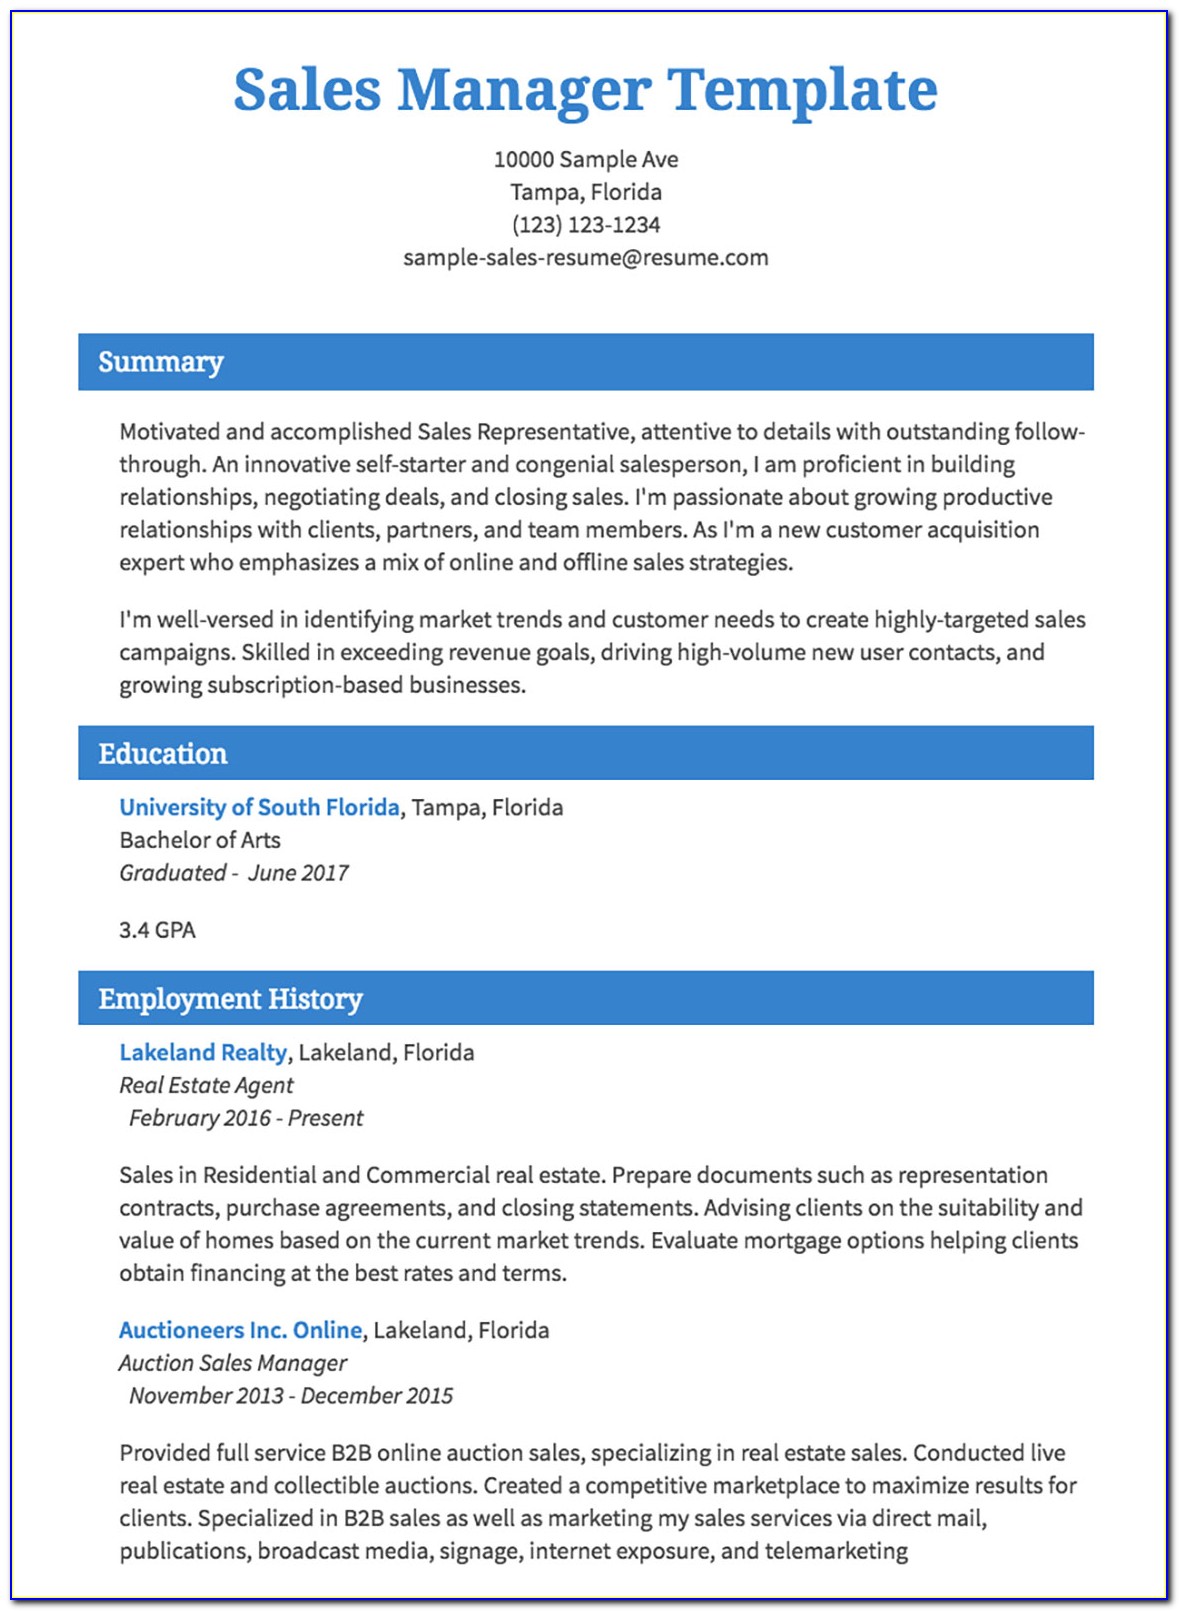 Civil Engineering Resume Writing Services